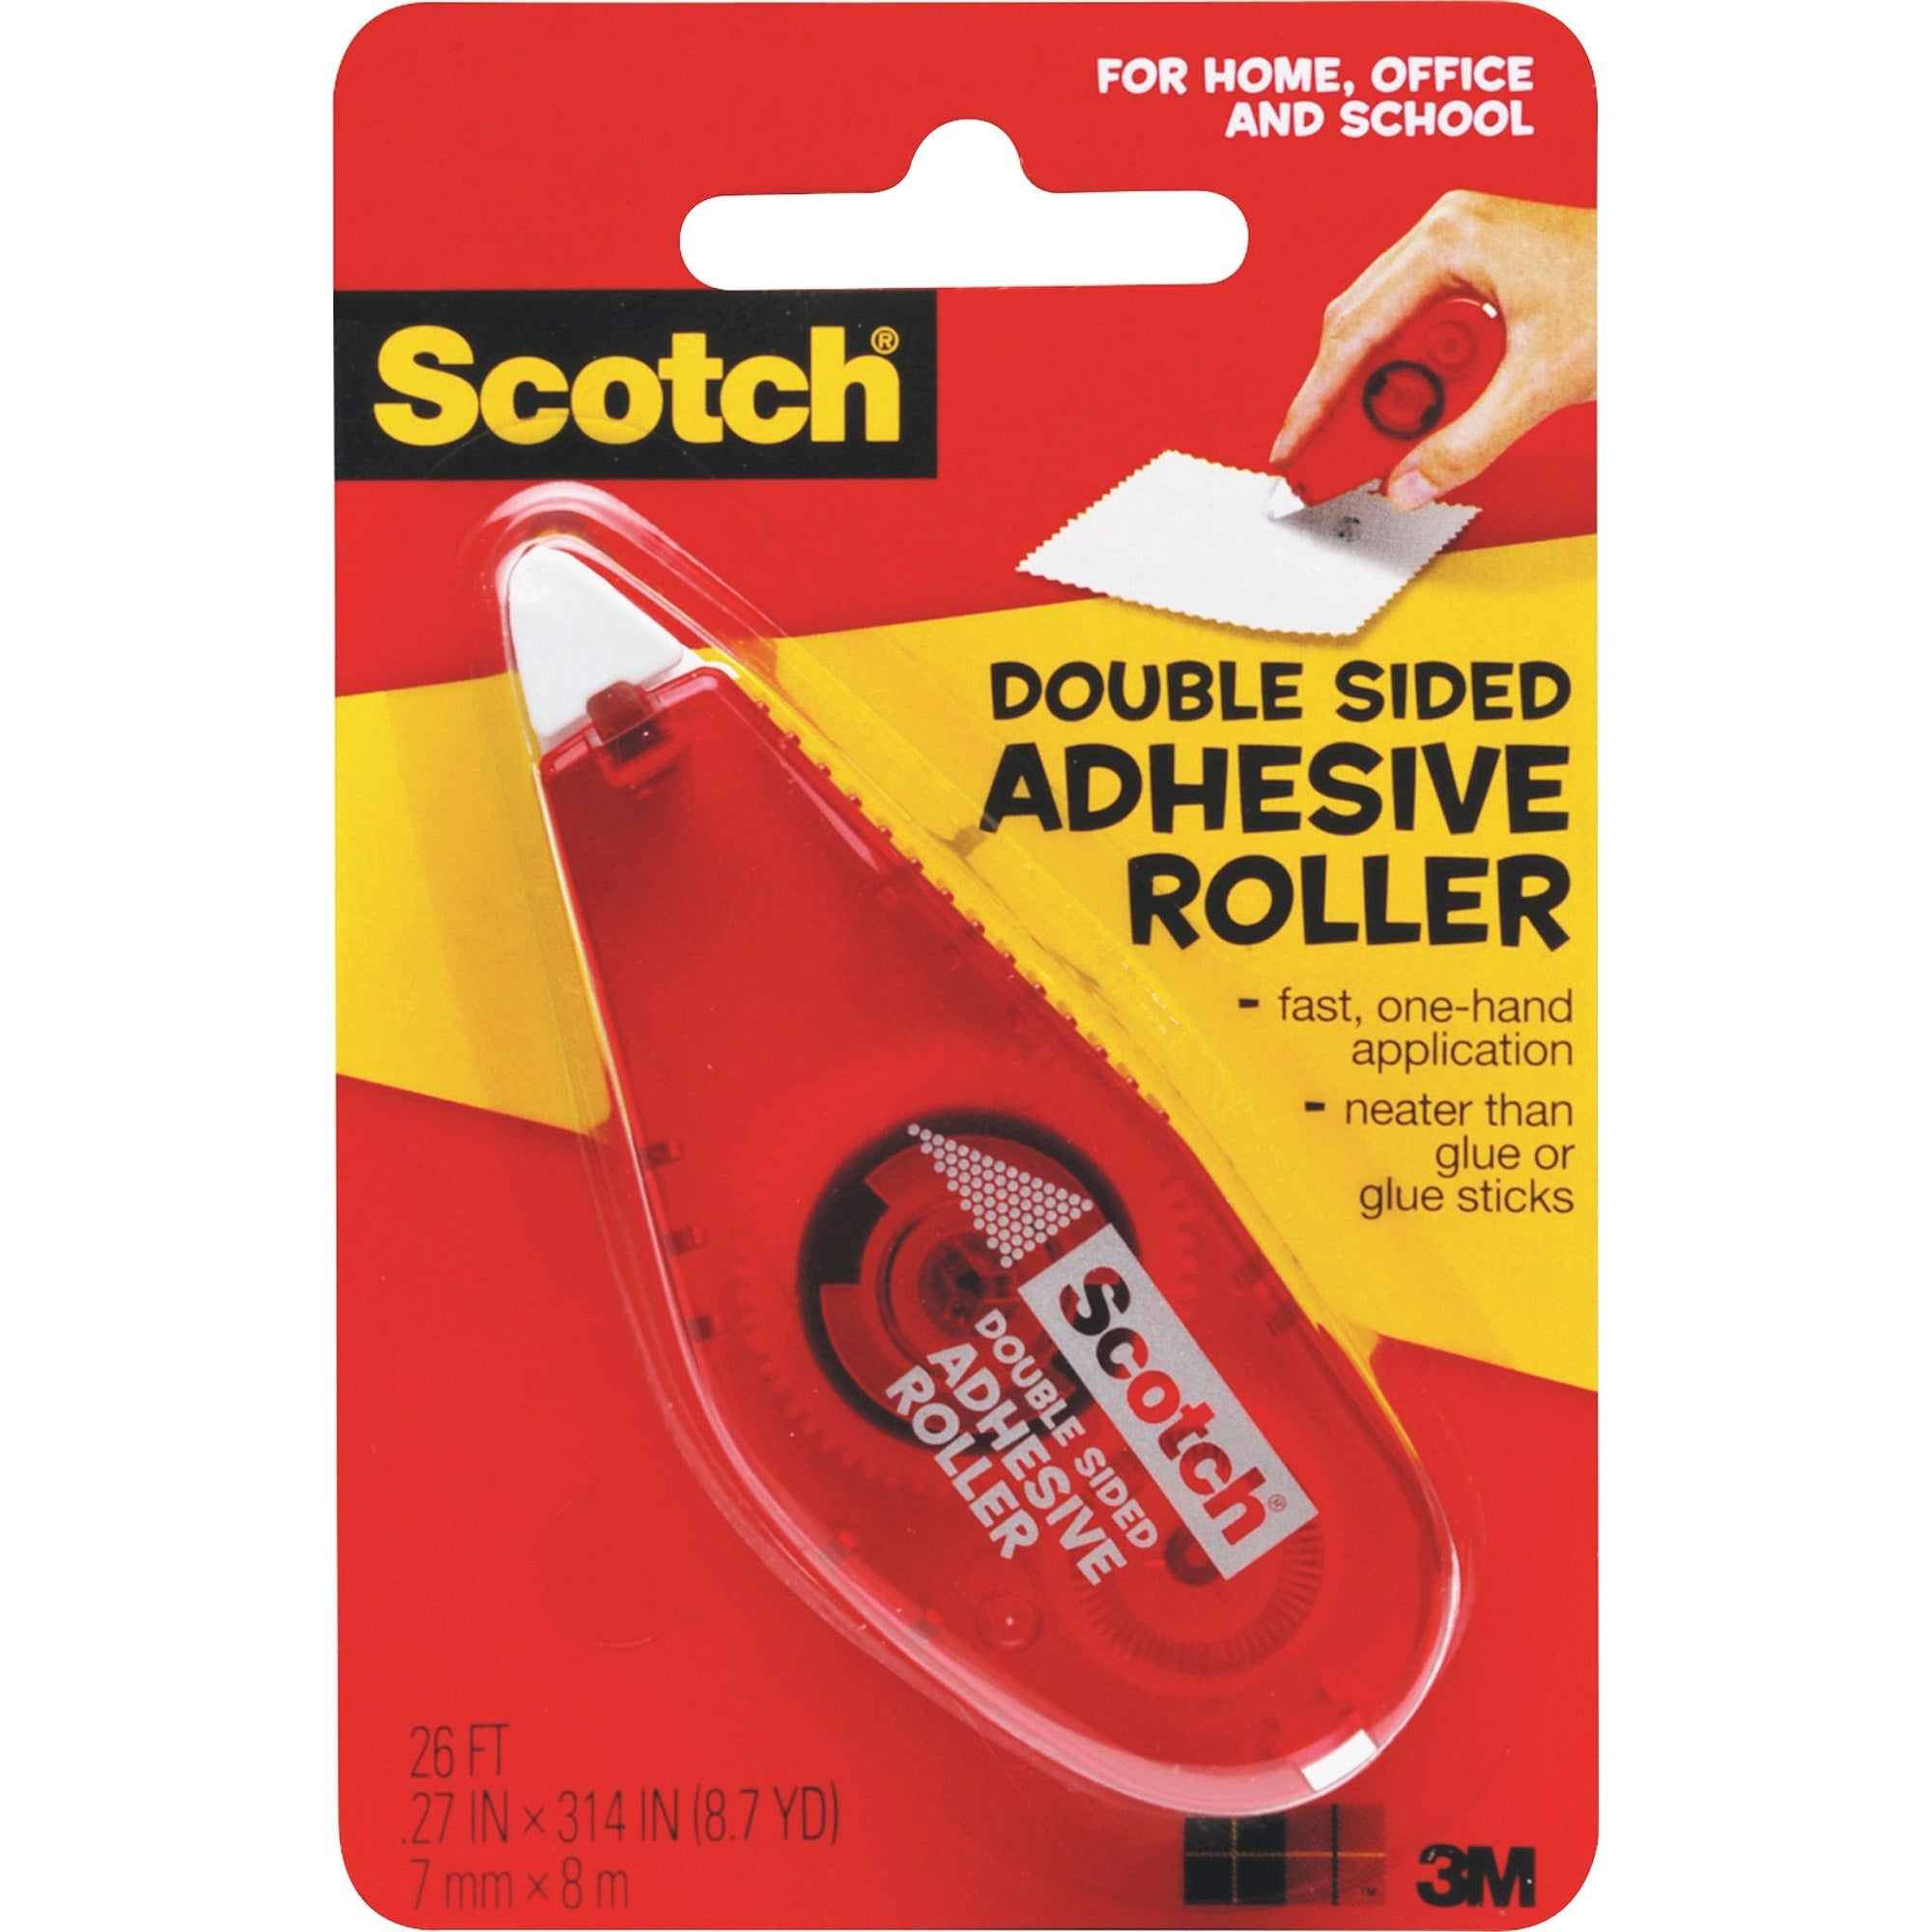 Scotch Double-Sided Adhesive Roller - 26 ft Length x 27" Width - Dispenser Included - Handheld Dispenser - For Multipurpose - 1 Each - Clear - 